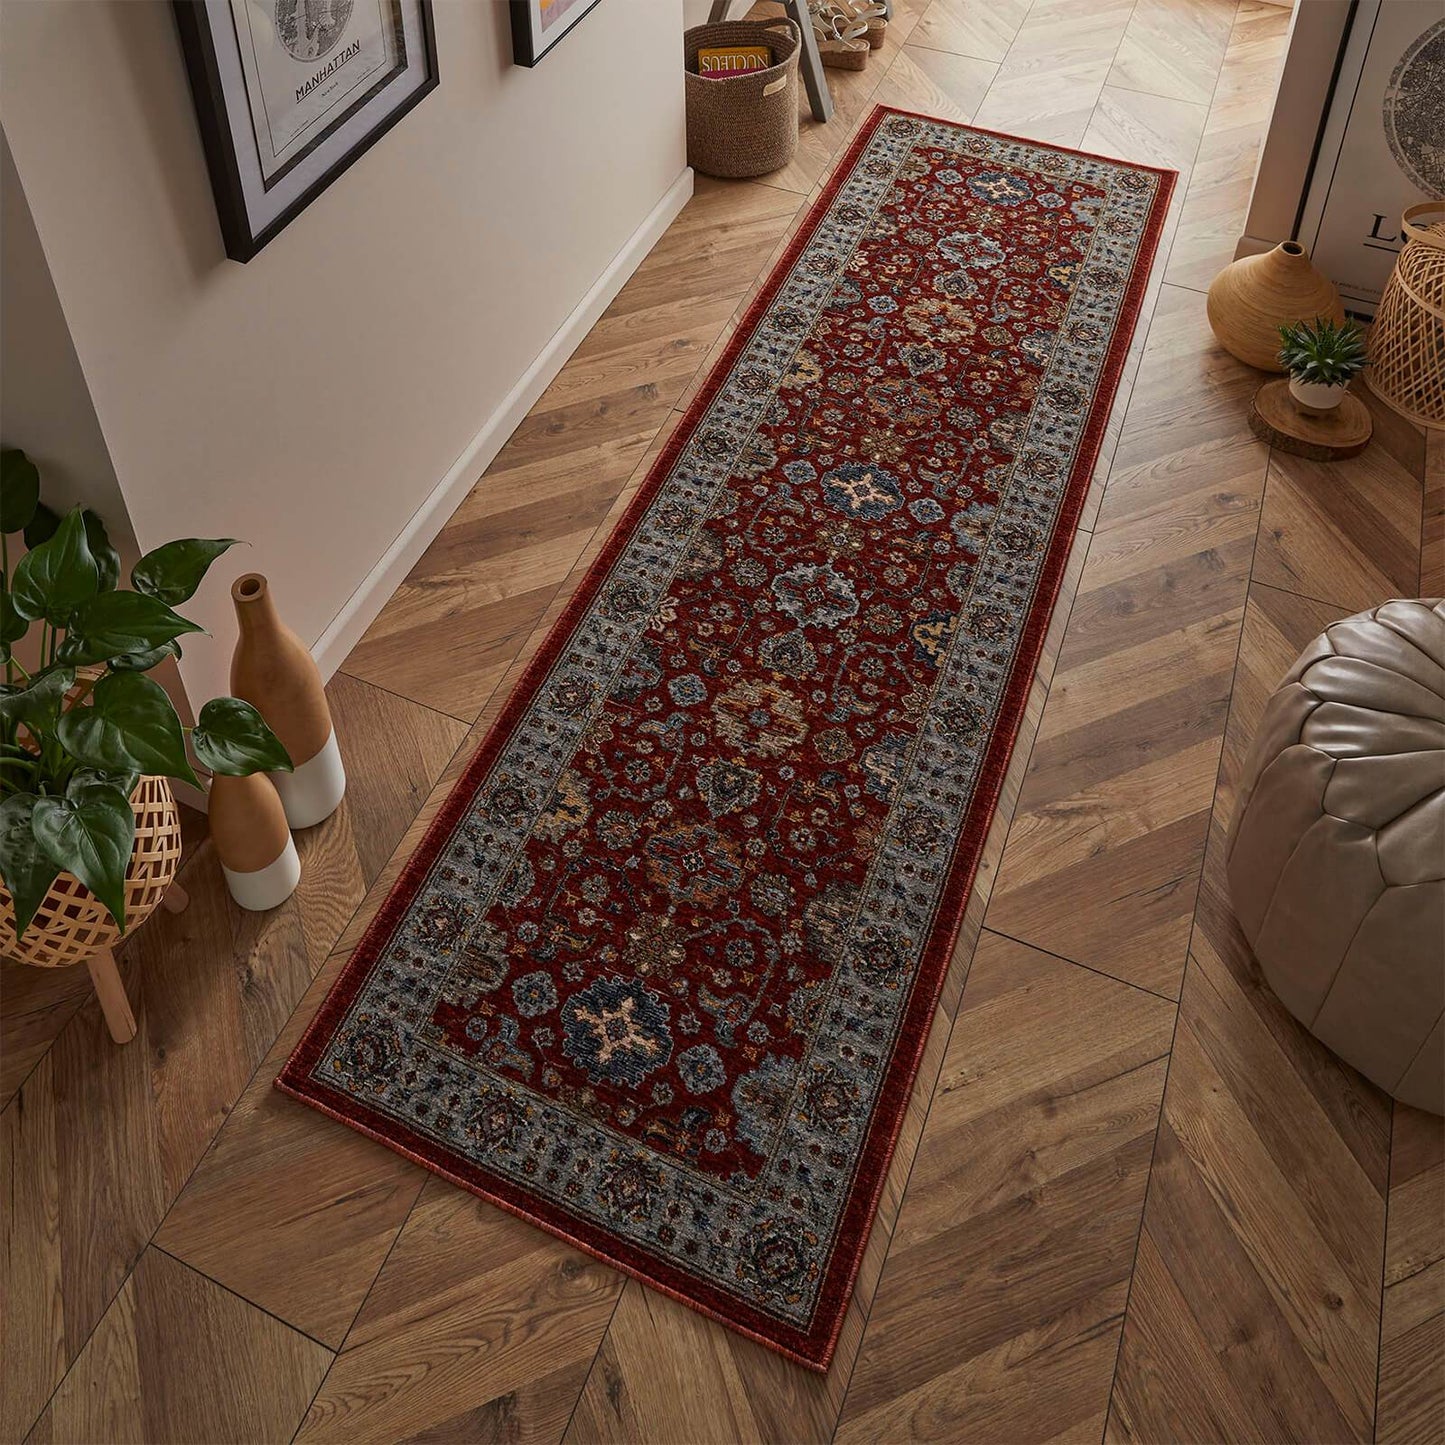 Sarouk 561 C Red, Blue and Cream Traditional Rugs